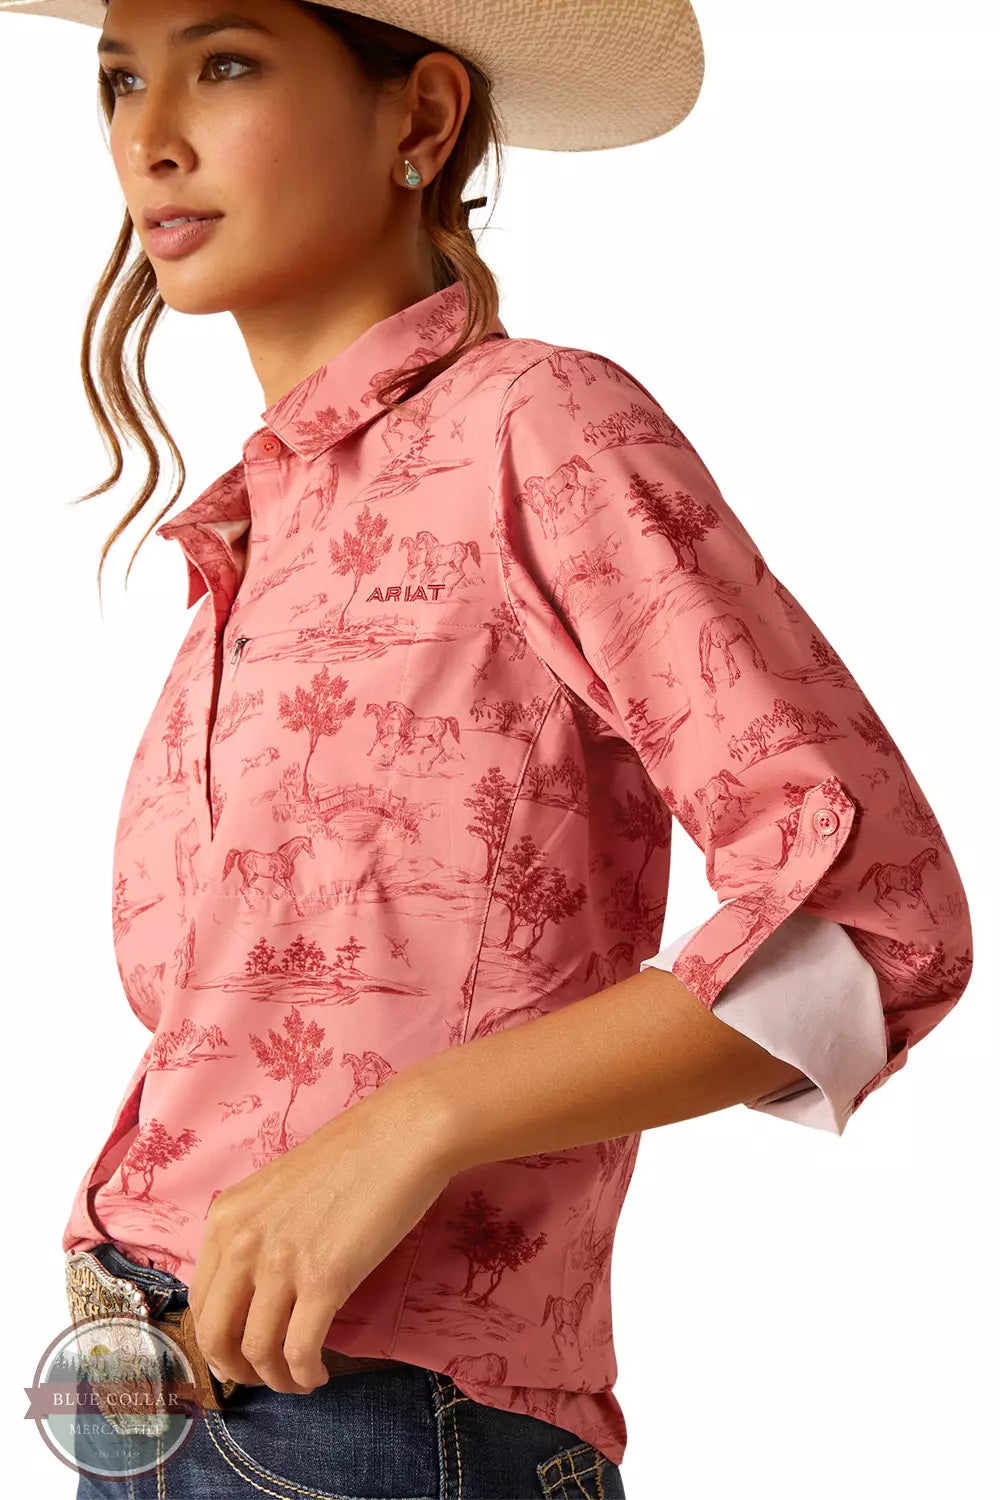 Ariat 10048862 VentTEK Stretch Shirt in Faded Rose Toile Side View